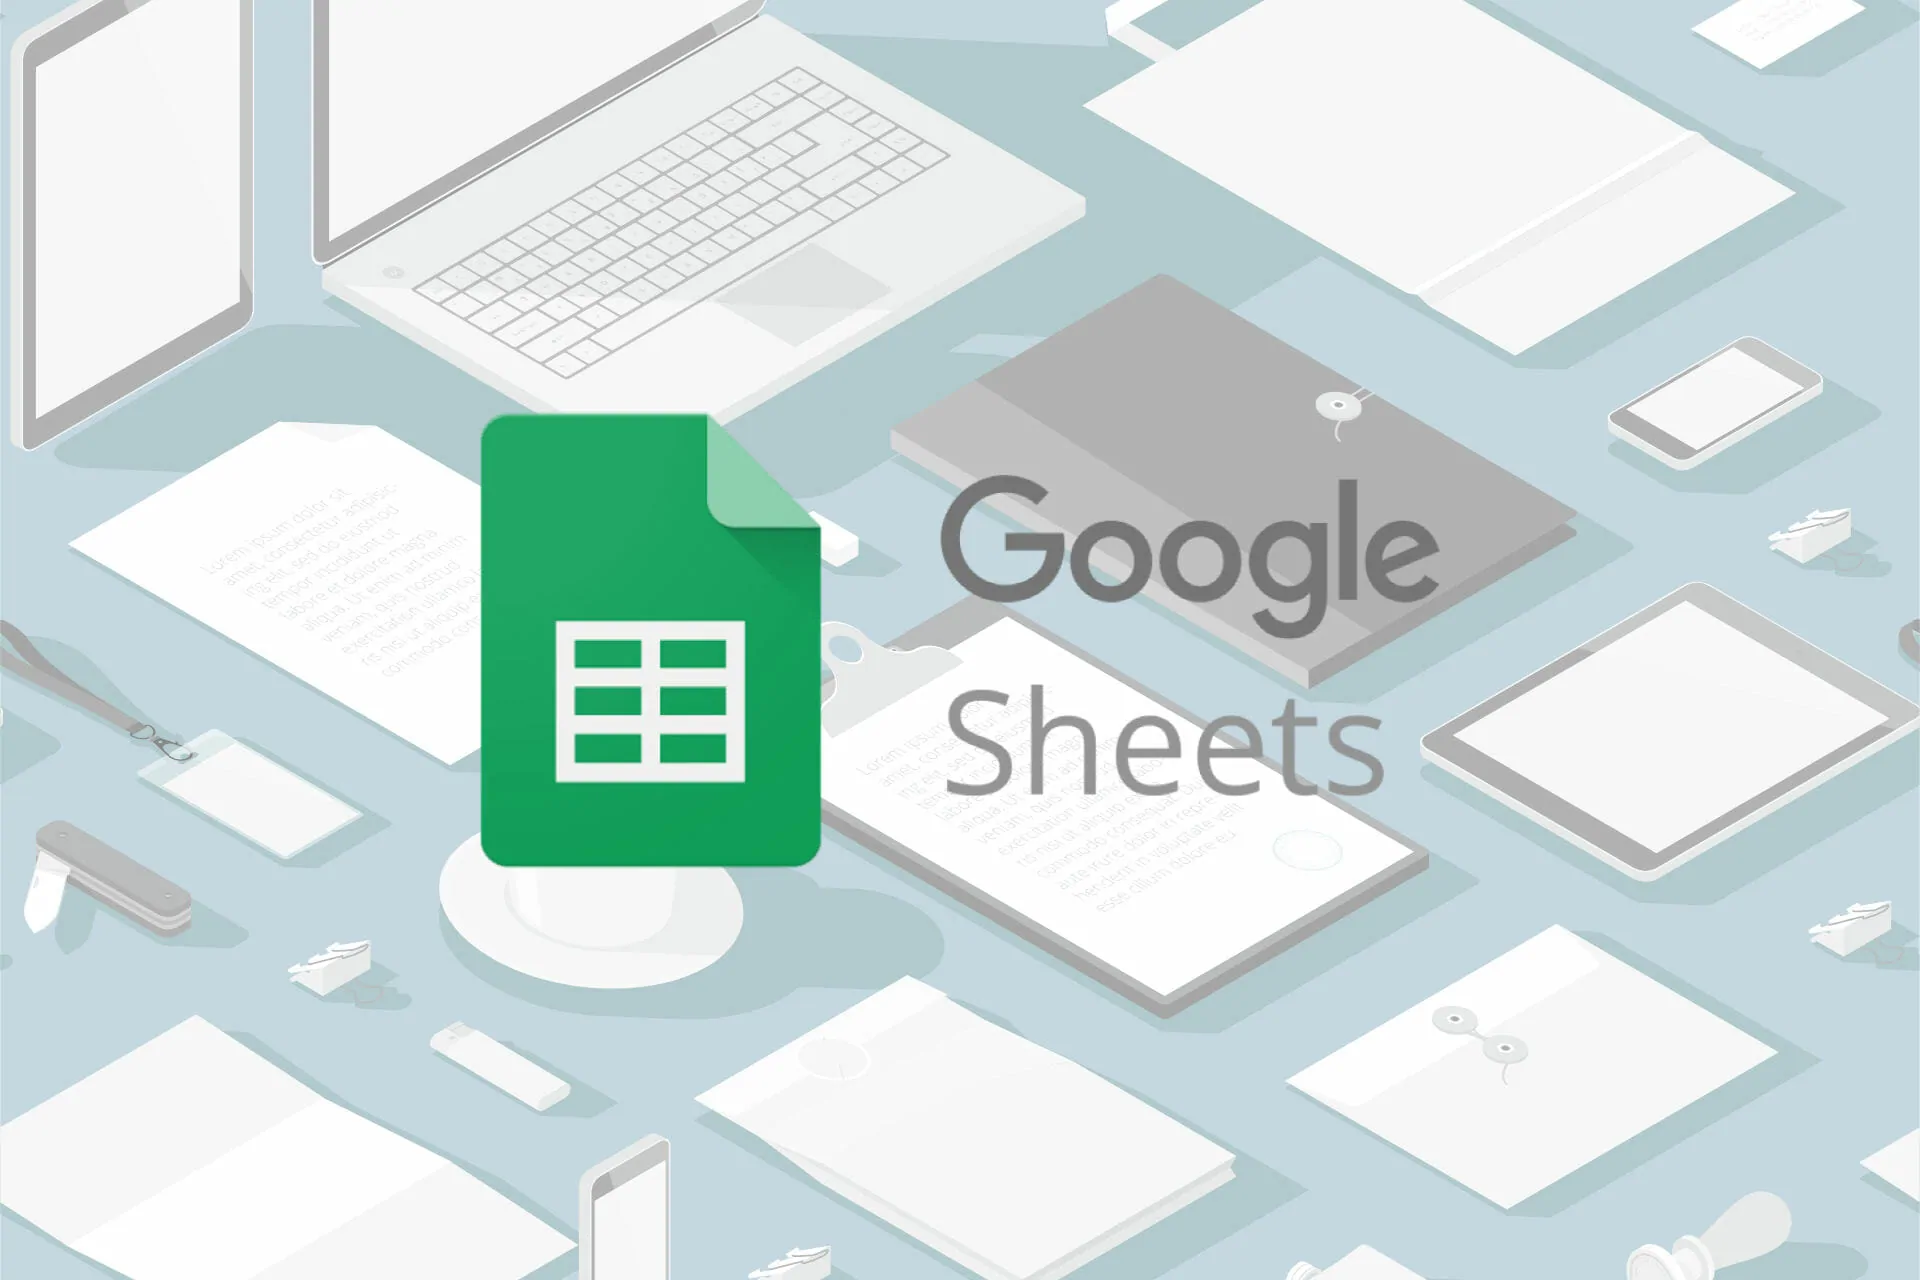 how to add words legend in google sheets